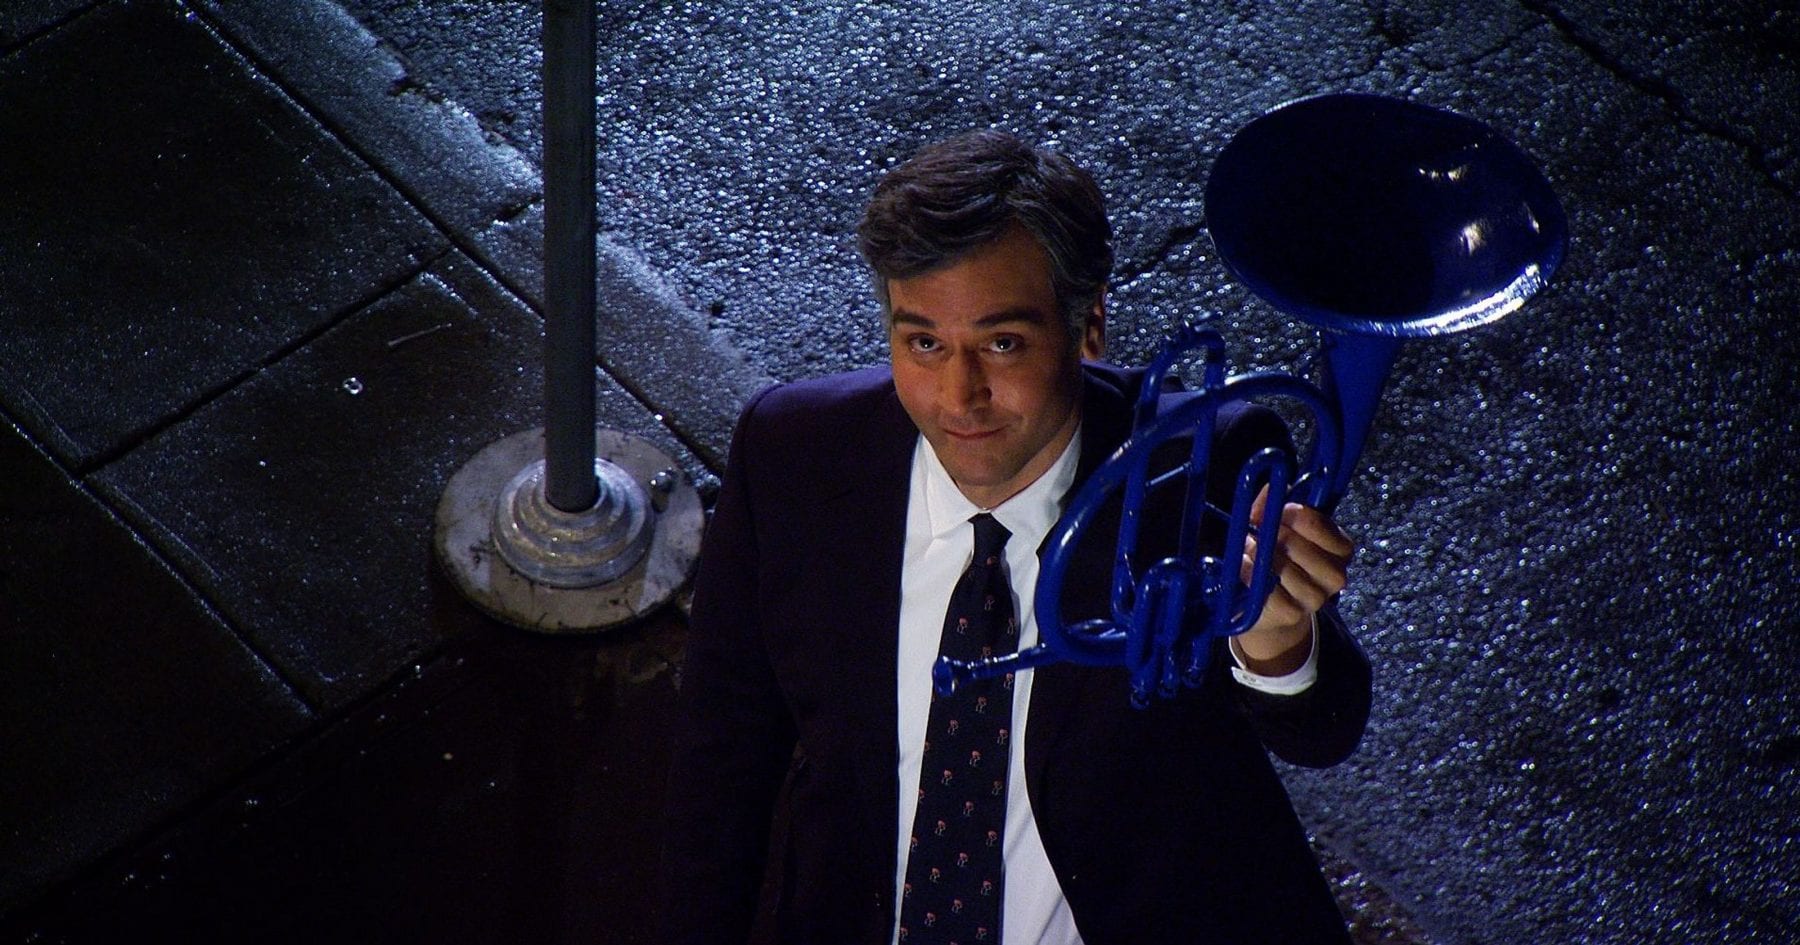 How I Met Your Mother finale, blue french horn